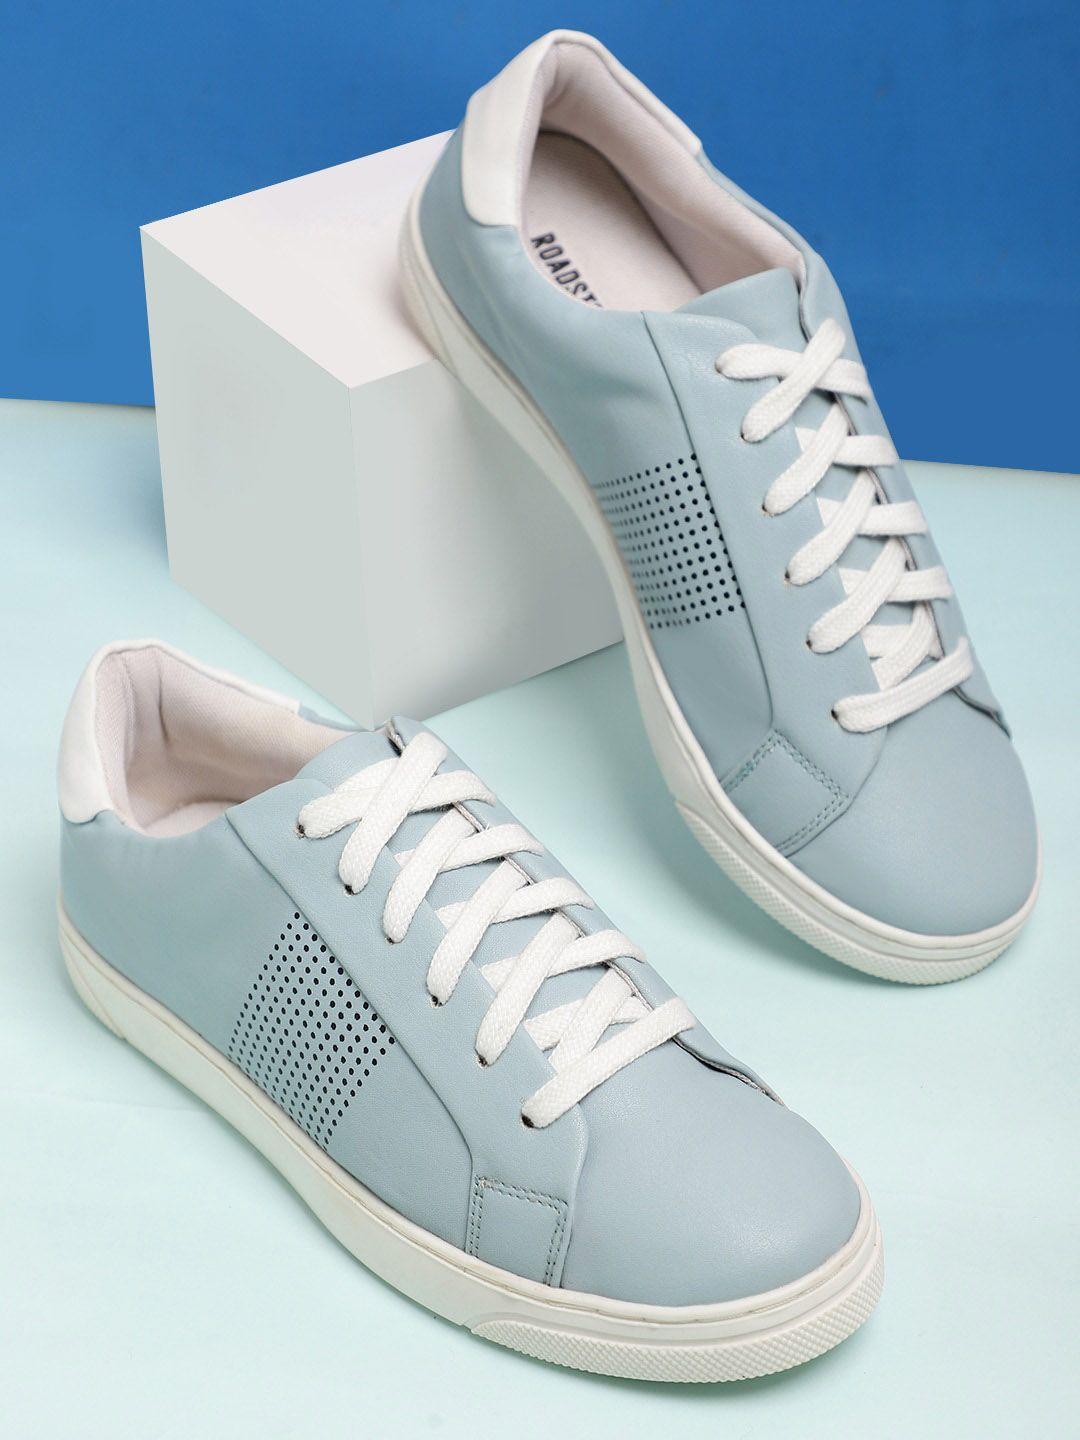 the roadster lifestyle co. women lace-up casual sneakers